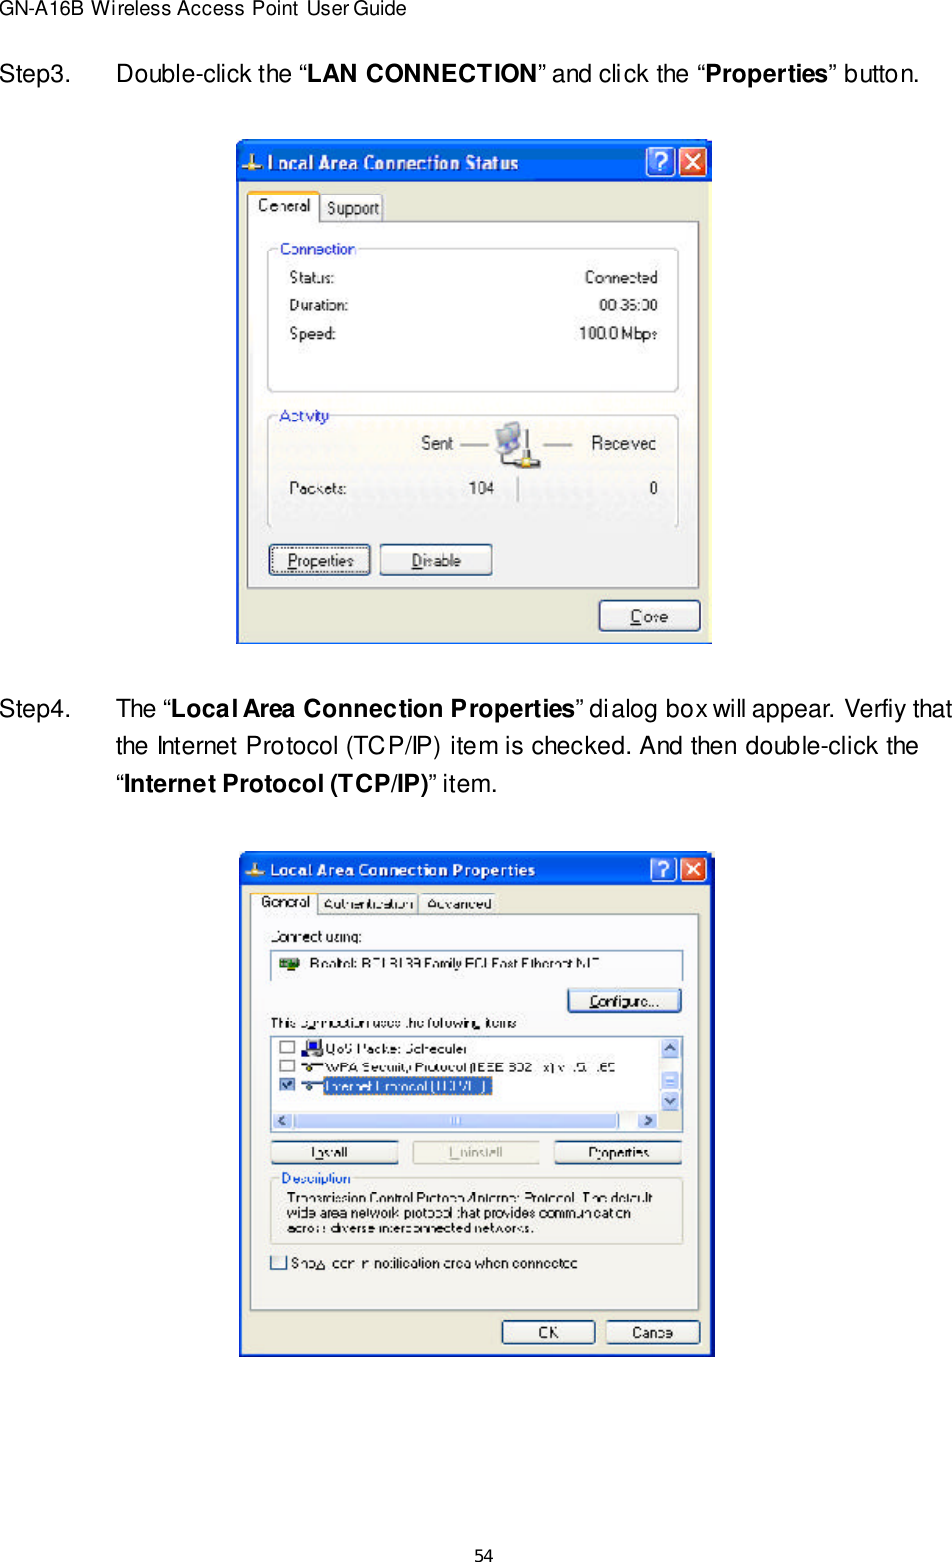 54GN-A16B Wireless Access Point User GuideStep3.Double-click the “LAN CONNECTION” and click the “Properties” button.Step4.The “Local Area Connection Properties” dialog box will appear. Verfiy thatthe Internet Protocol (TCP/IP) item is checked. And then double-click the“Internet Protocol (TCP/IP)” item.